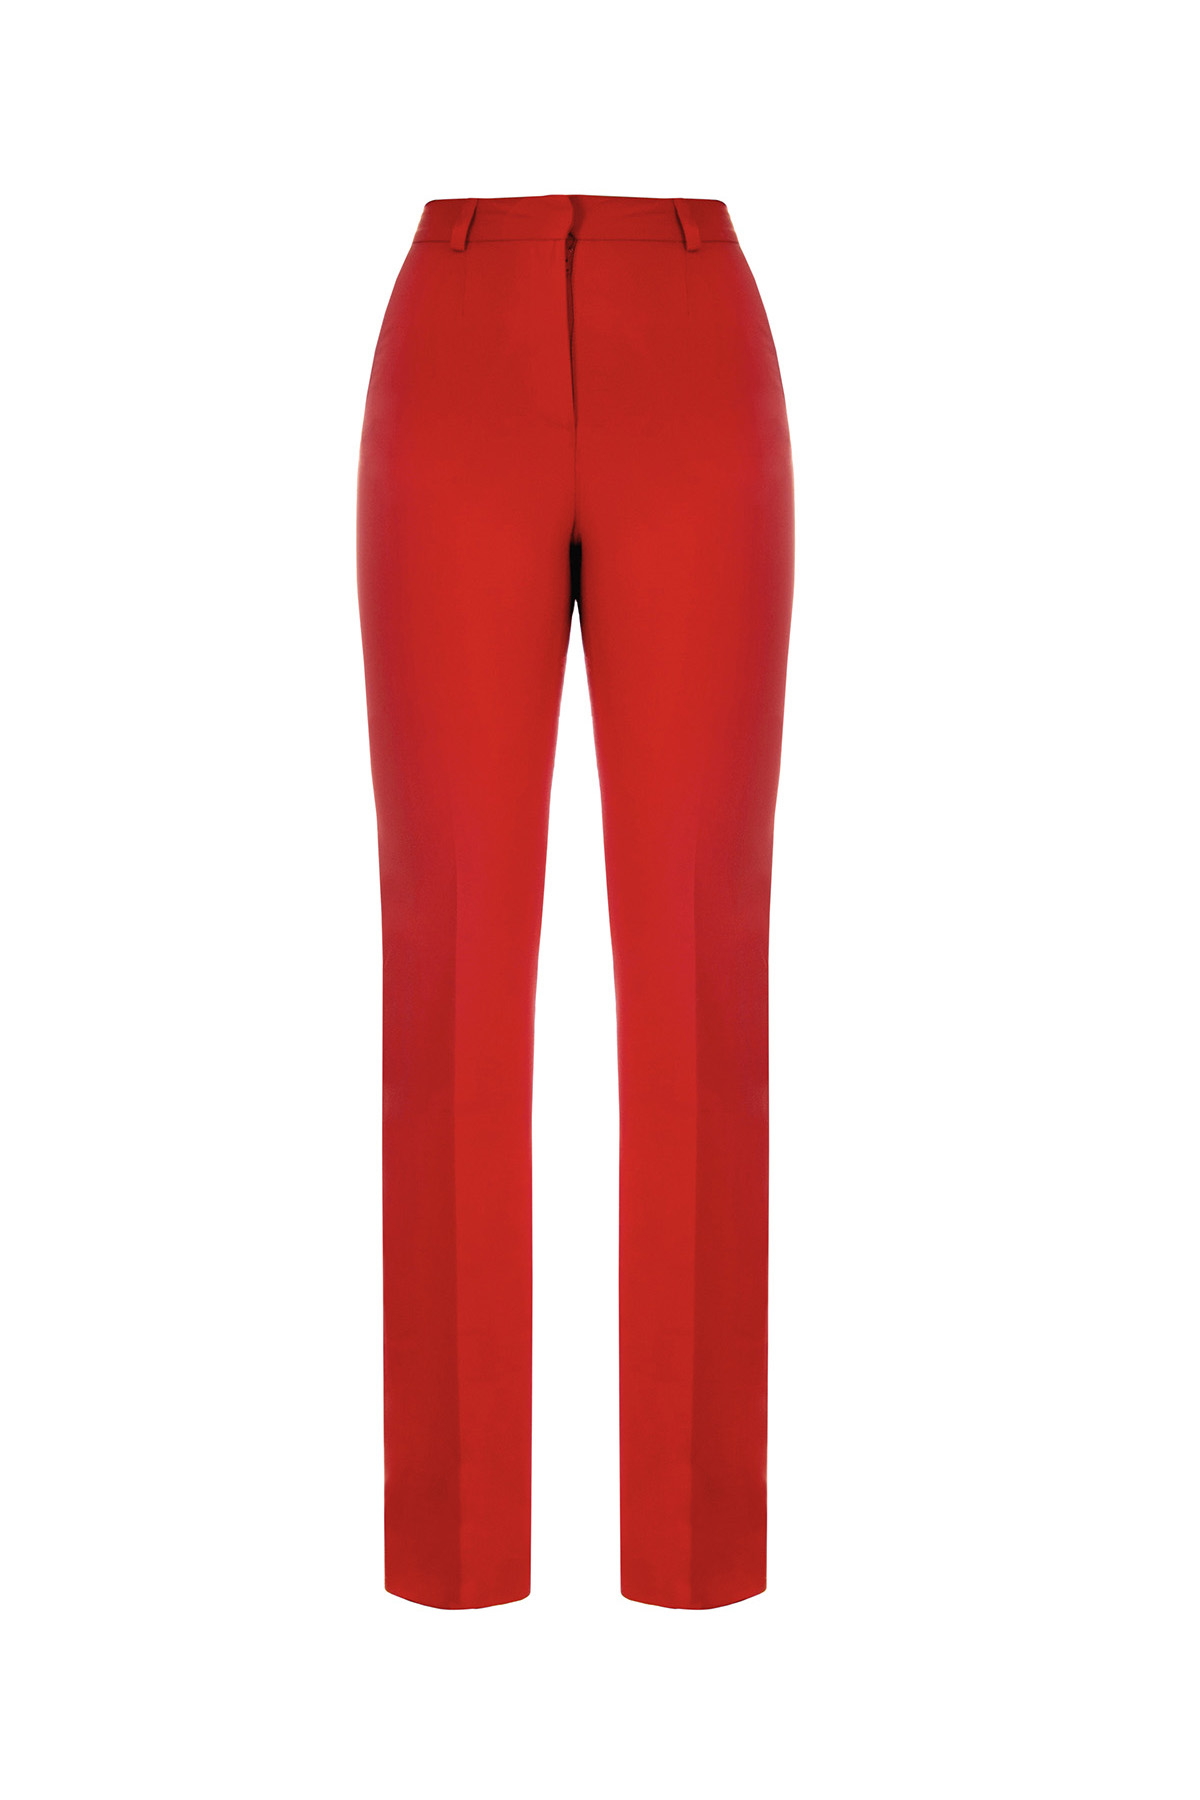 Red trousers, photo 6